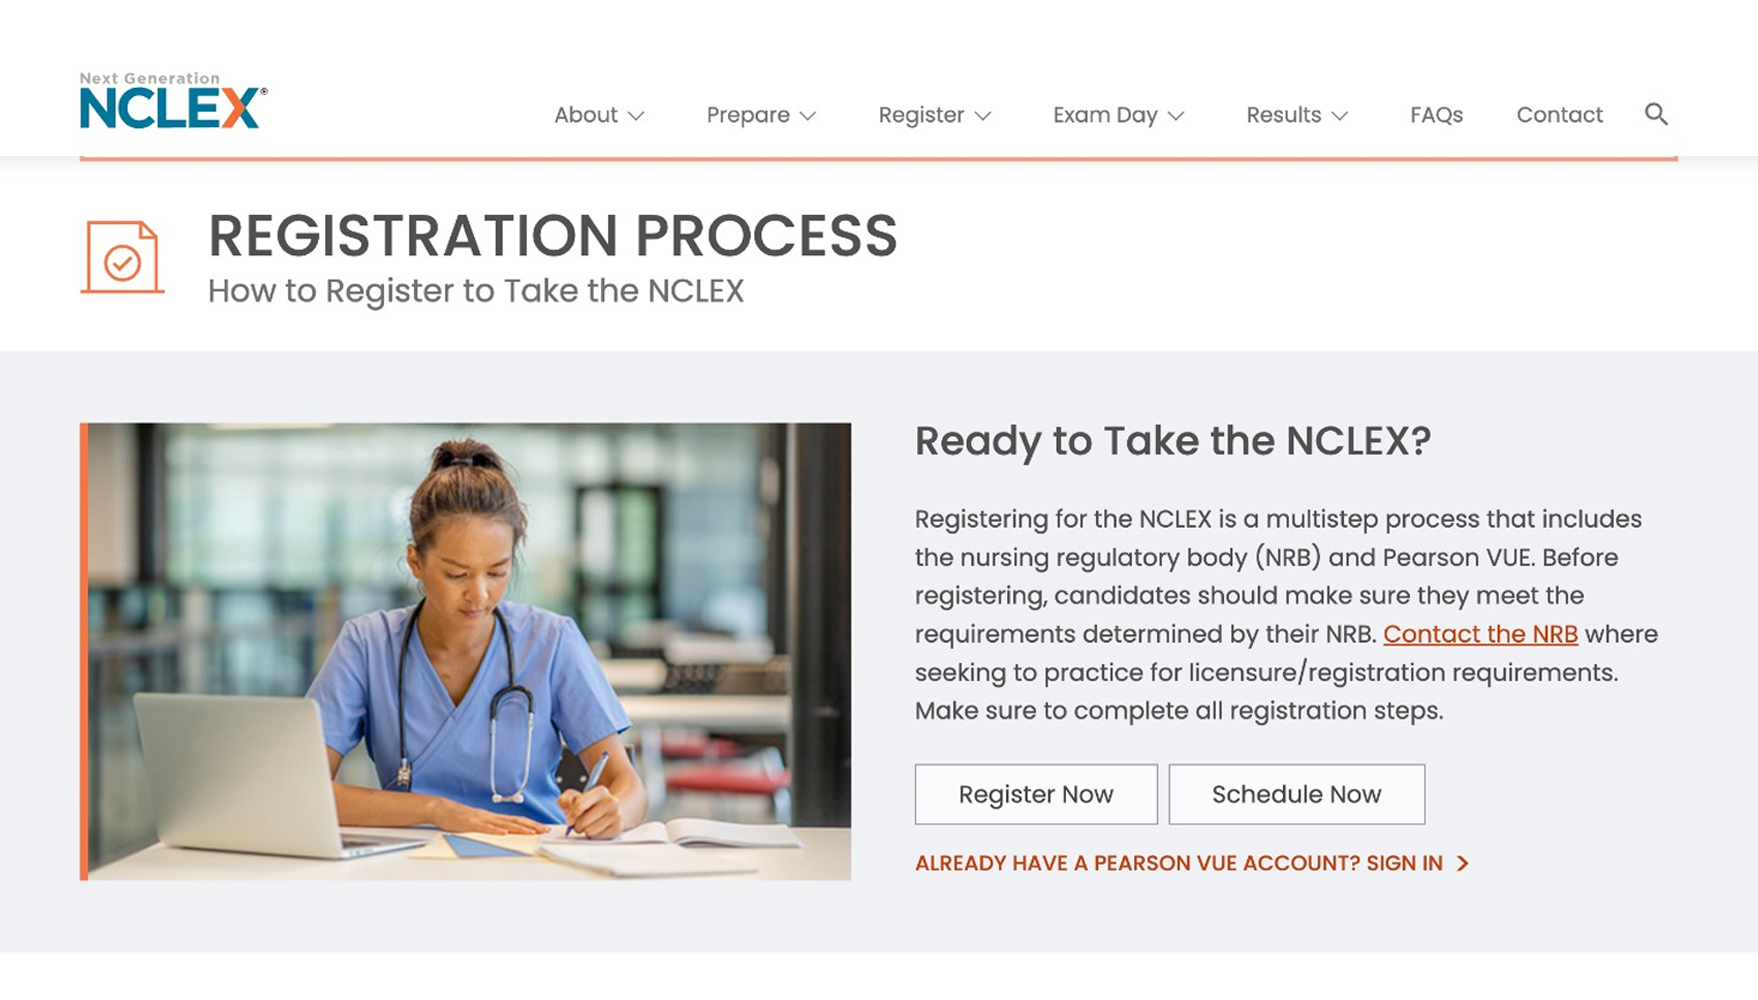 The registration process on the official NCLEX website